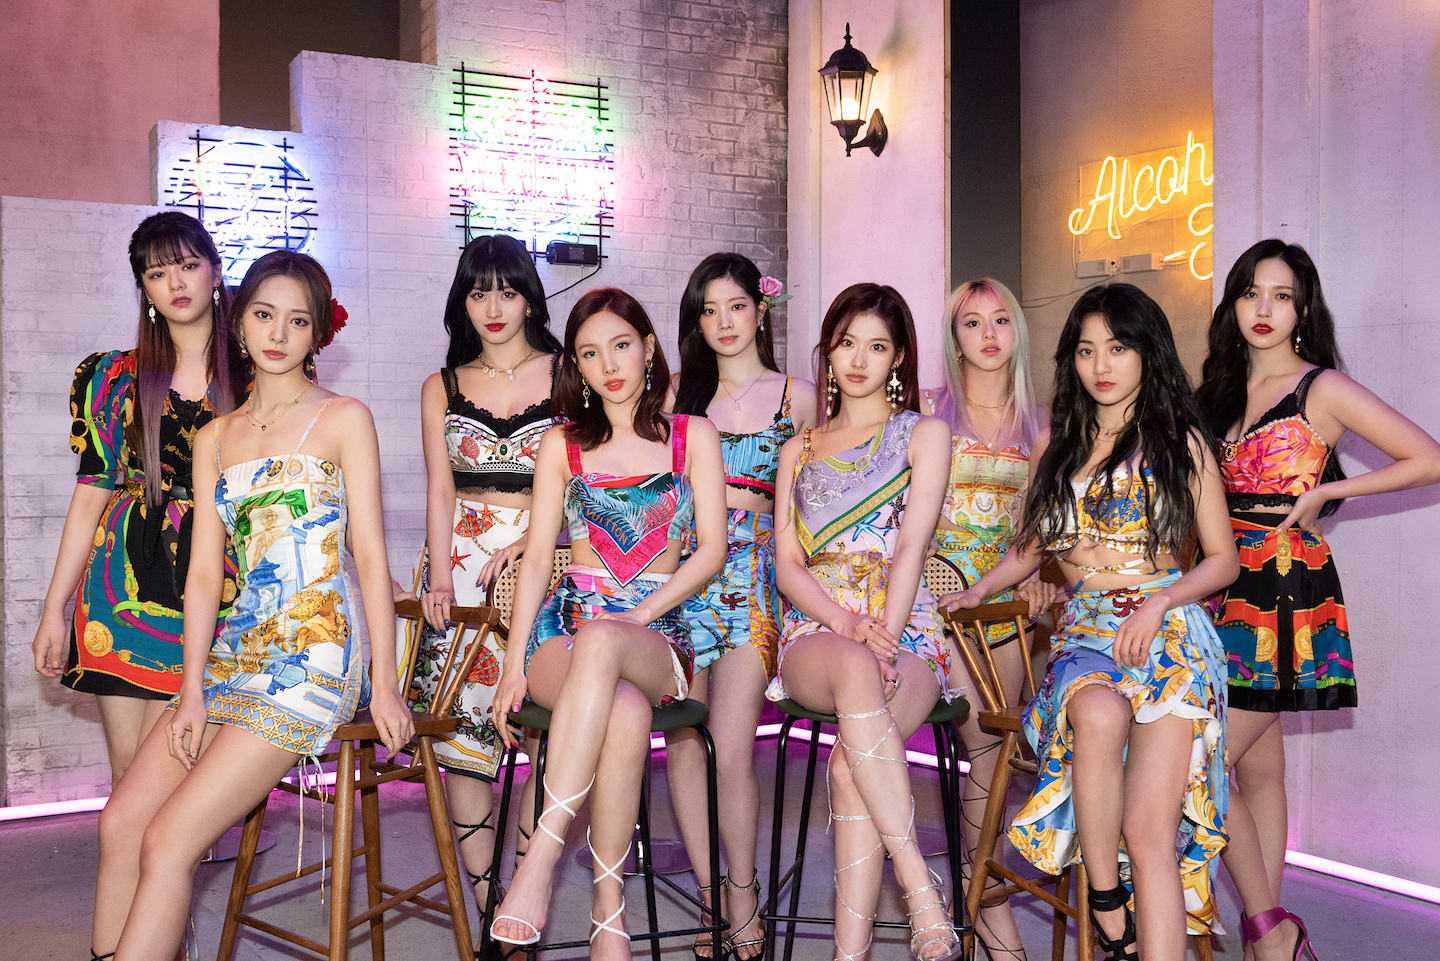 TWICE on Their Sisterhood, Supporters, and Summer Single 'Alcohol-Free